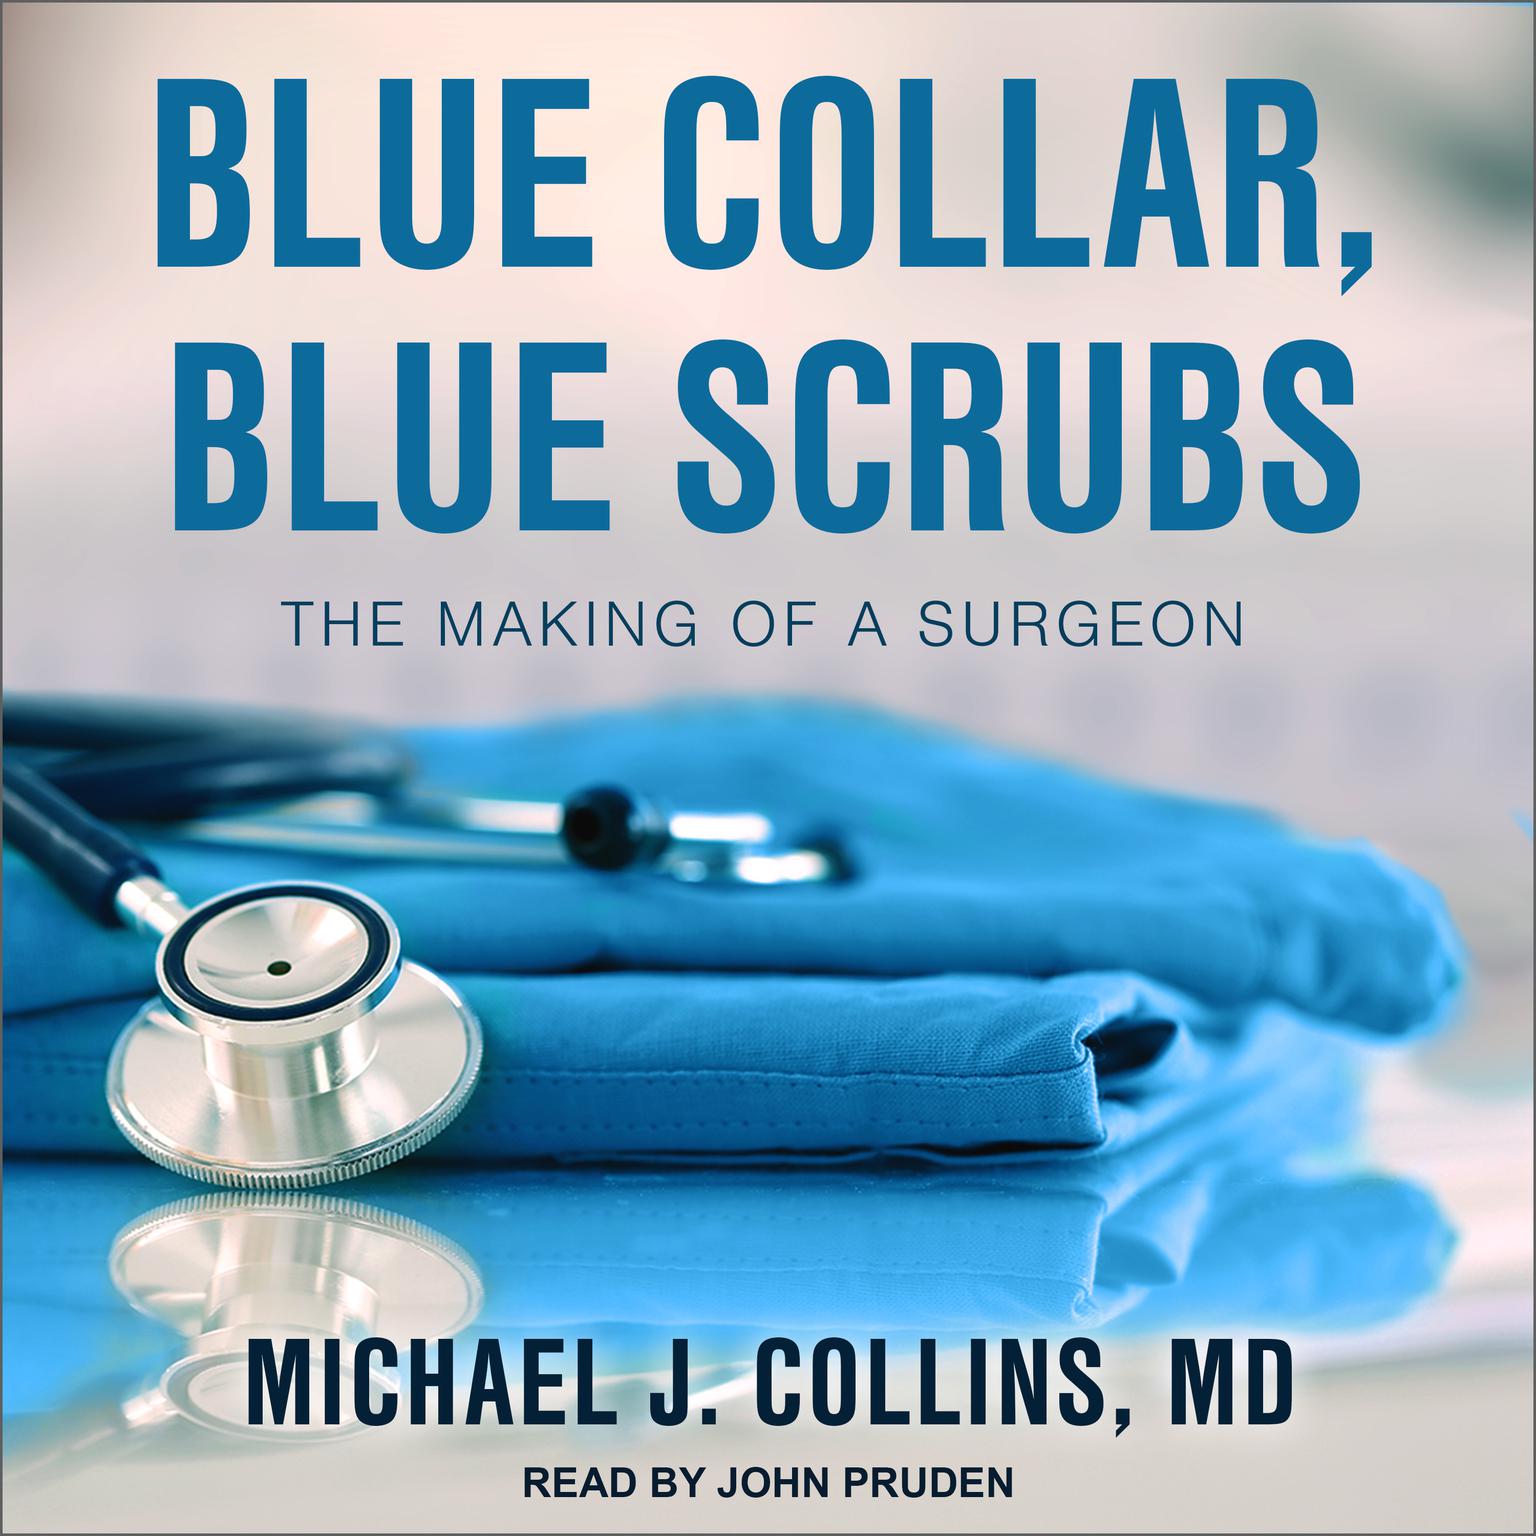 Blue Collar, Blue Scrubs: The Making of a Surgeon Audiobook, by Michael J. Collins